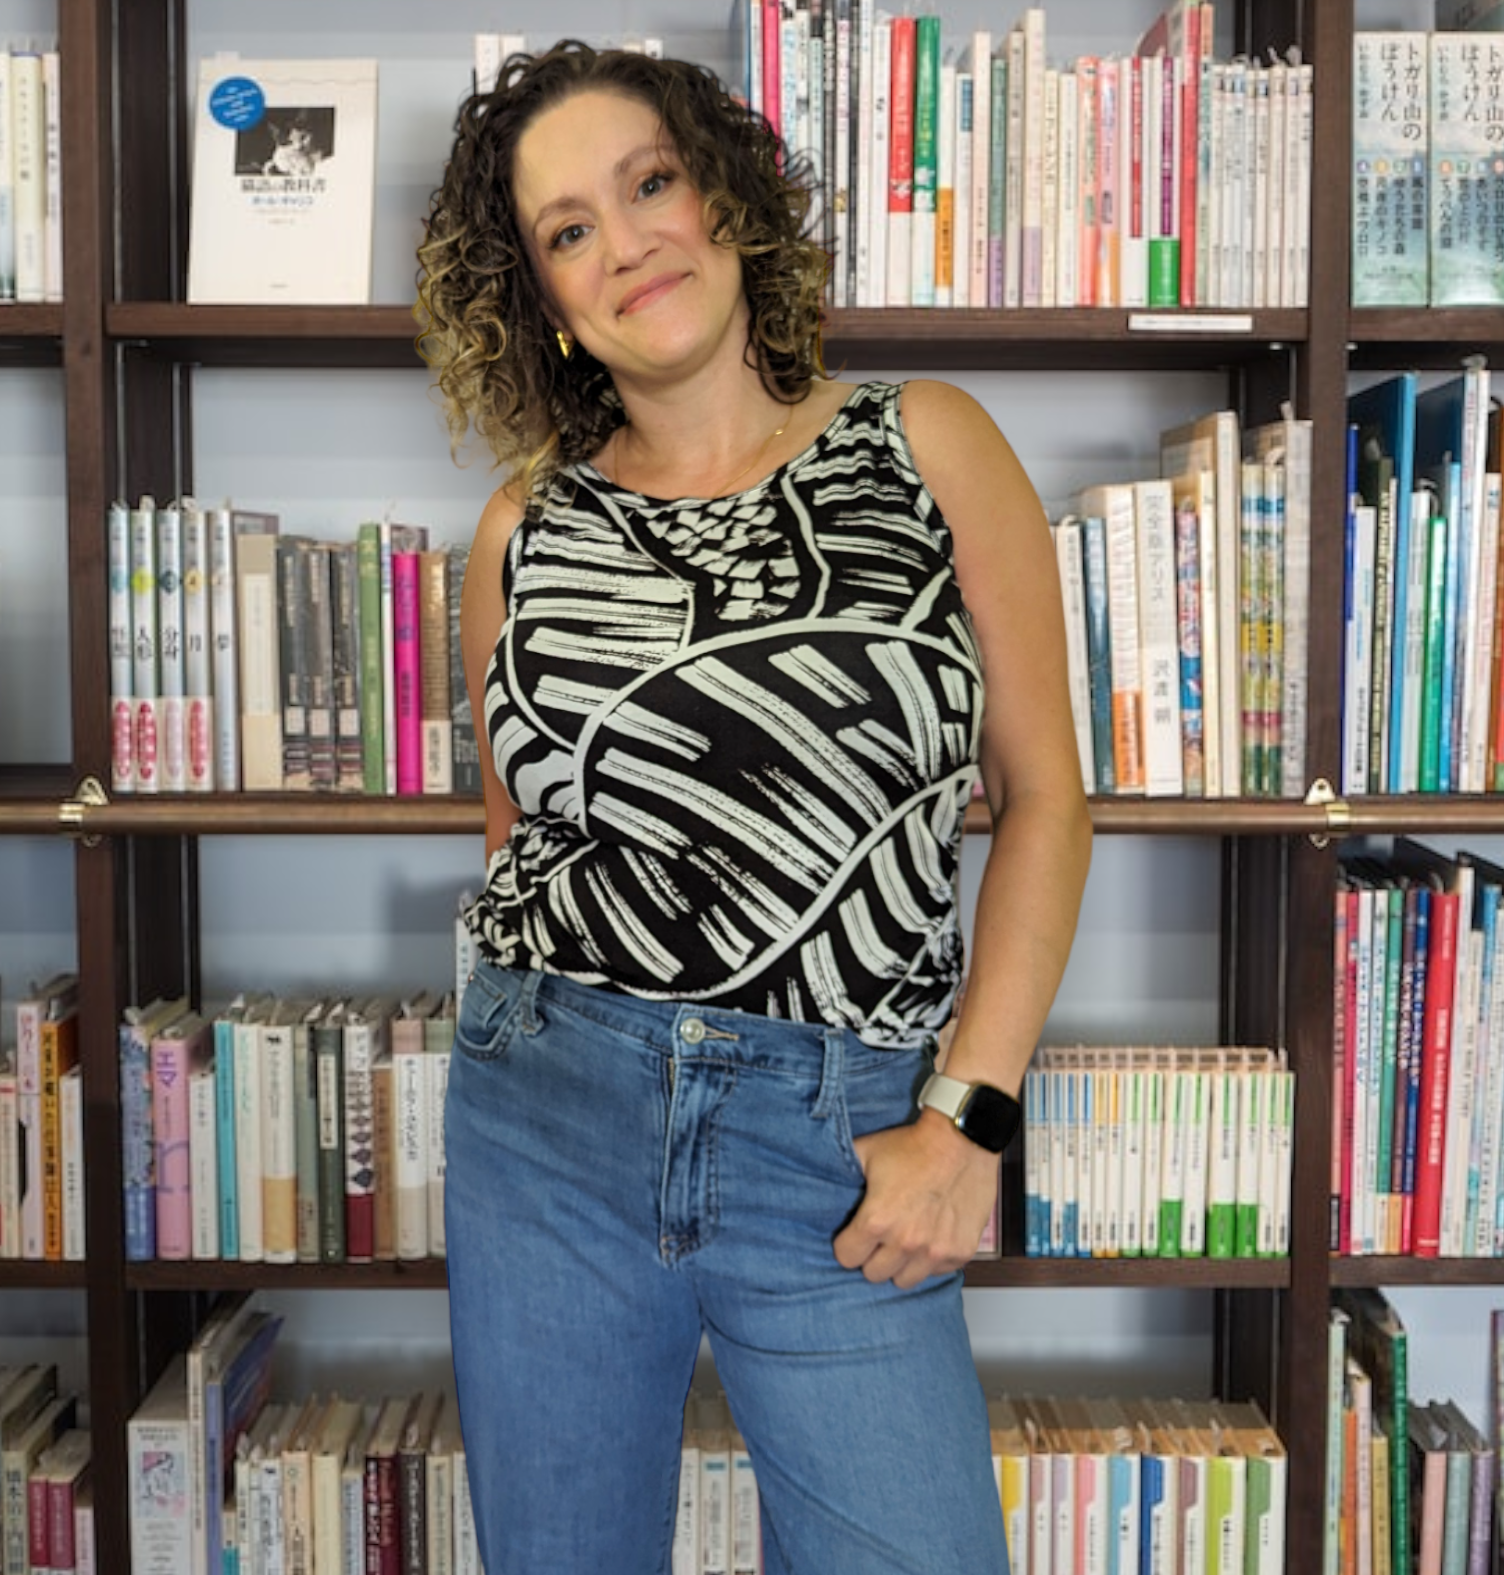 Why This Teacher is Using Armoire for Back-to-School Fashion